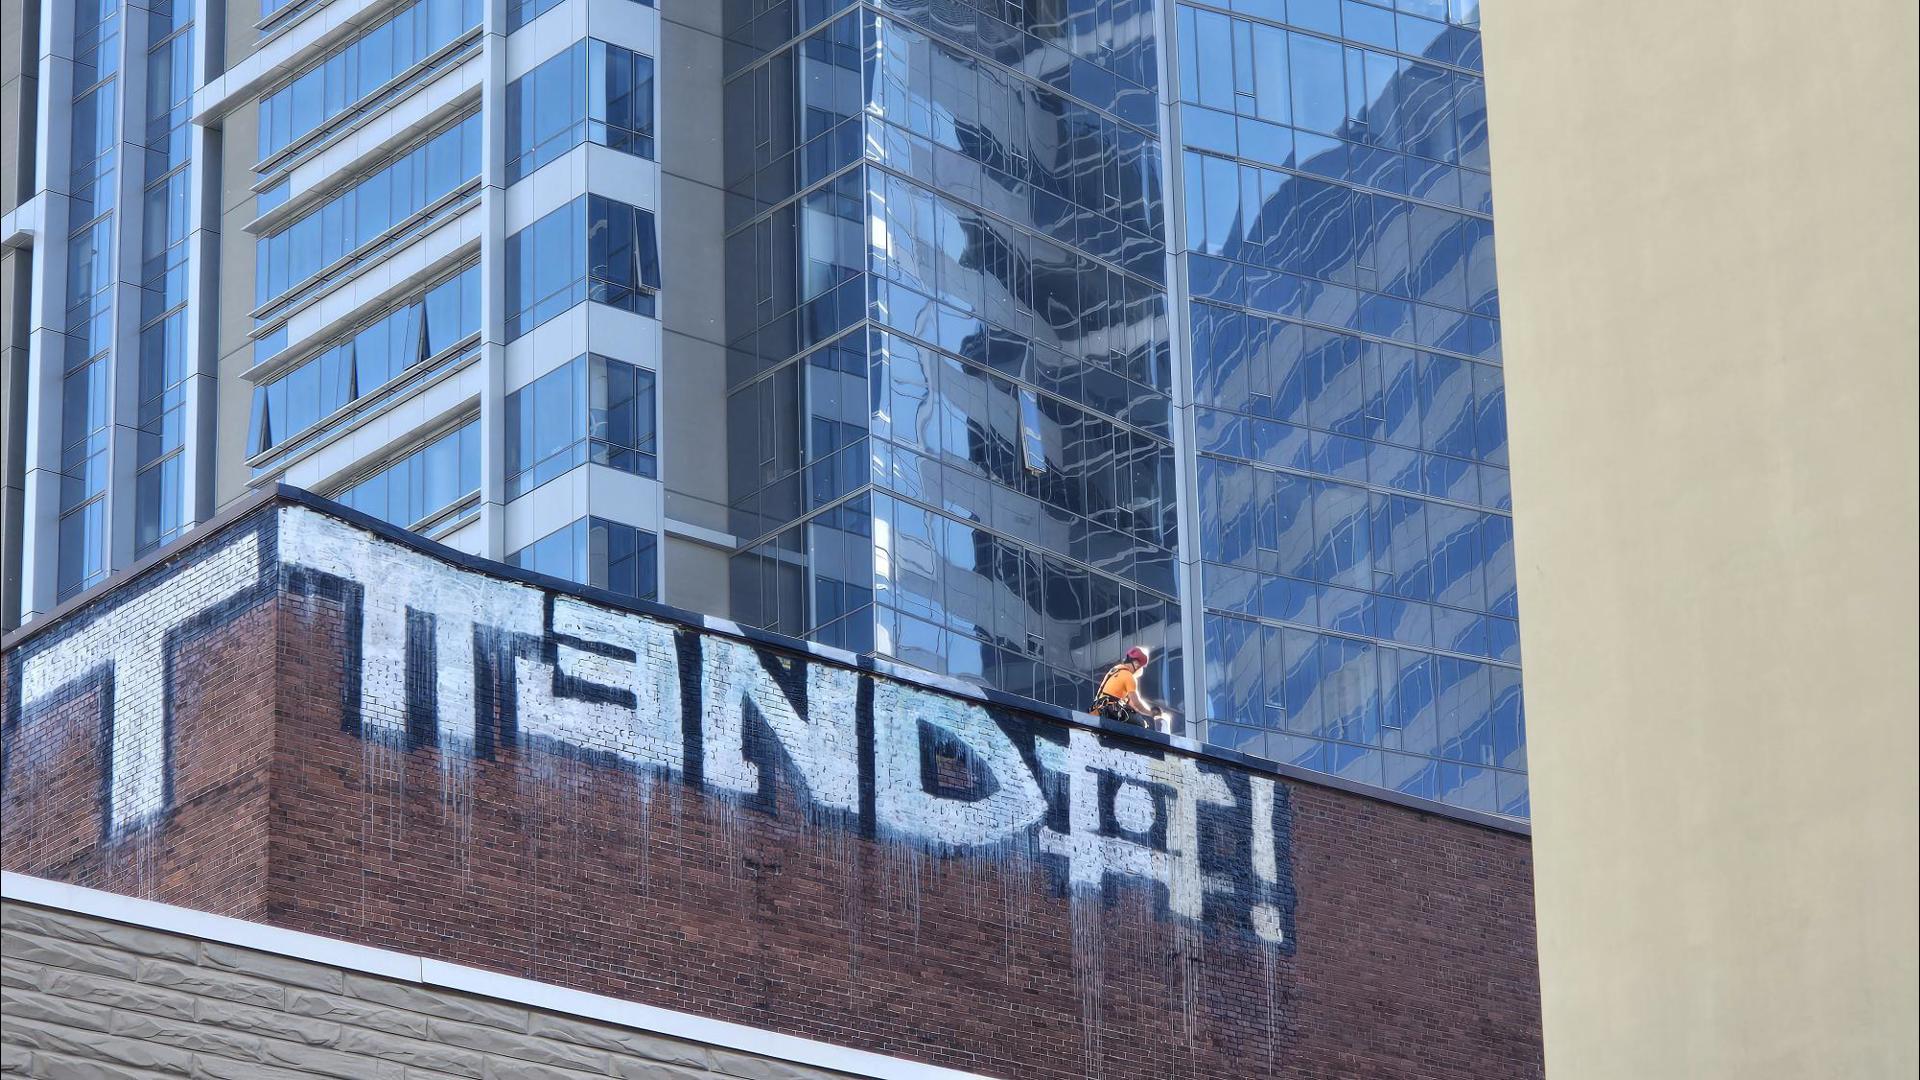 The Pythian Building has been defaced for several months, and it's finally being cleaned up.